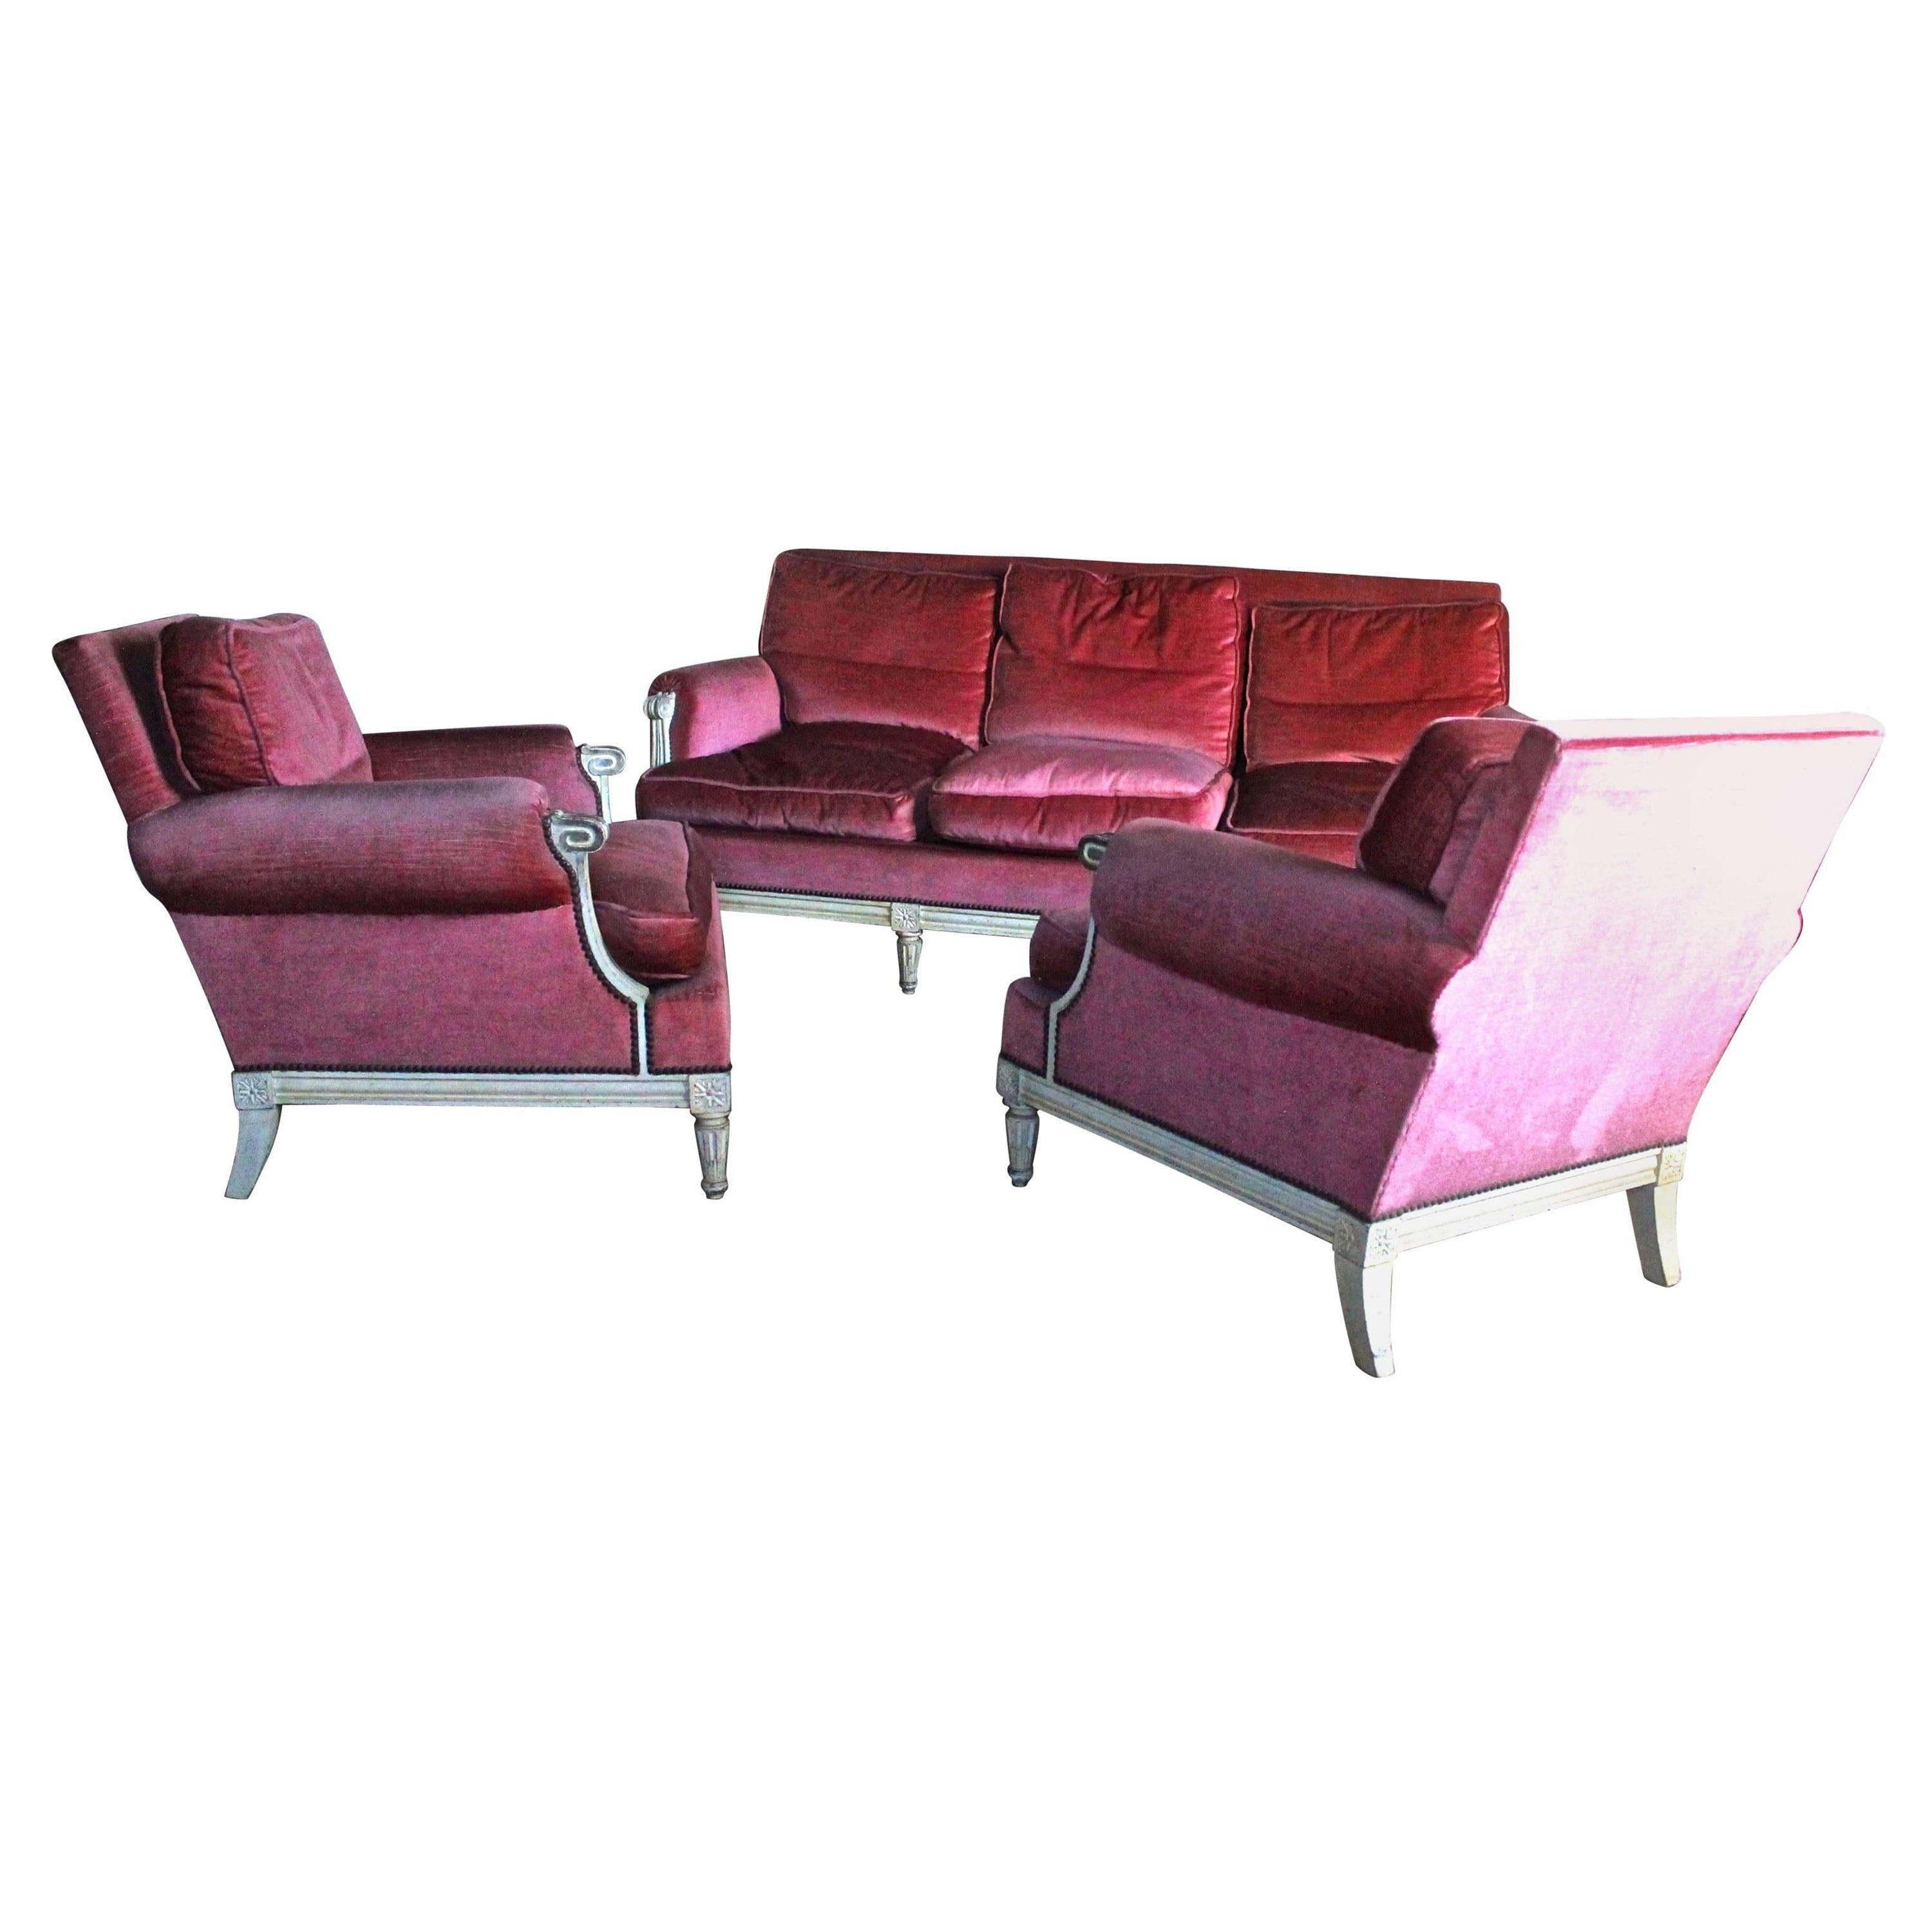 Maurice Hirsch Sofa and Armchairs, 1940s, Louis XVI Style